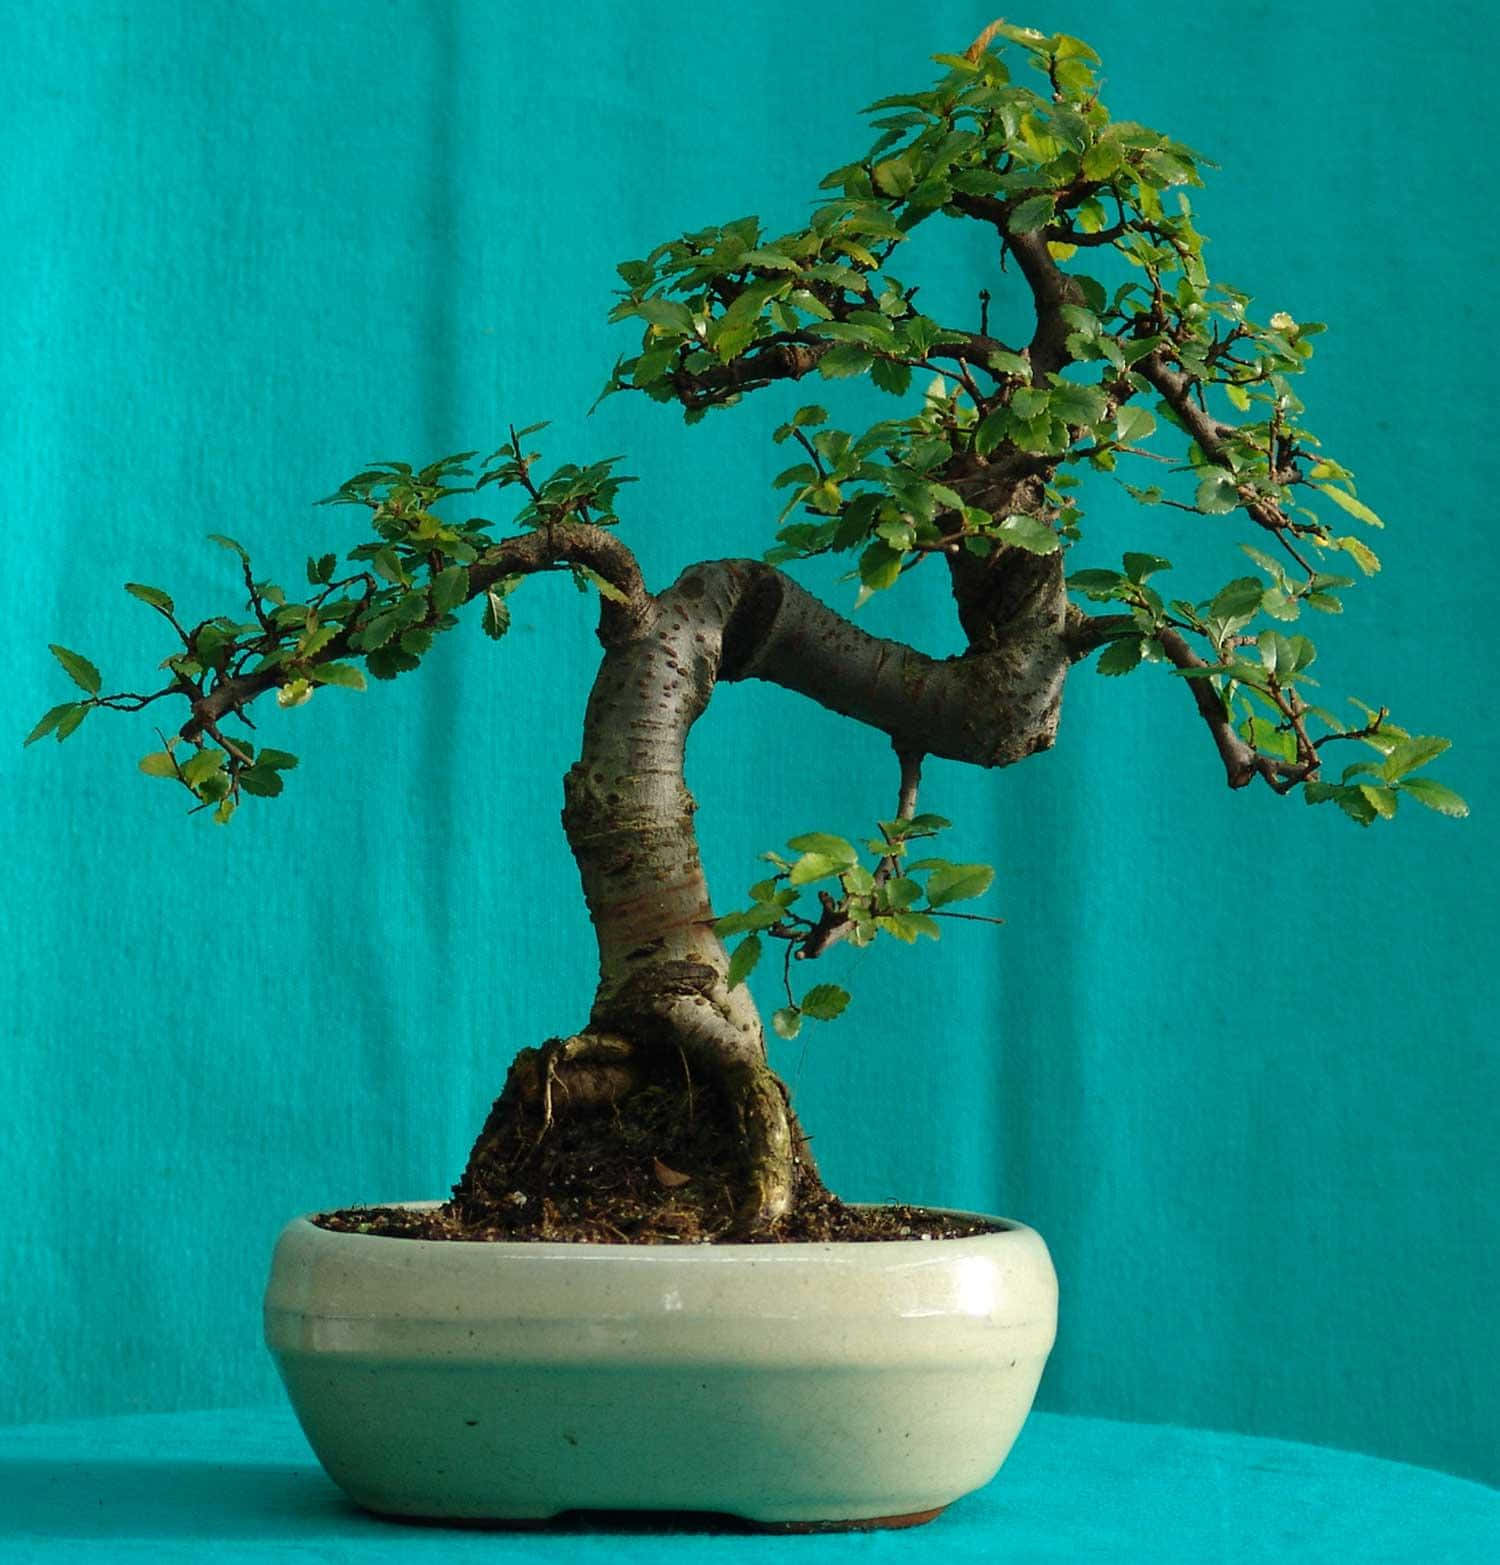 A Small Bonsai Tree In A Pot On A Blue Background